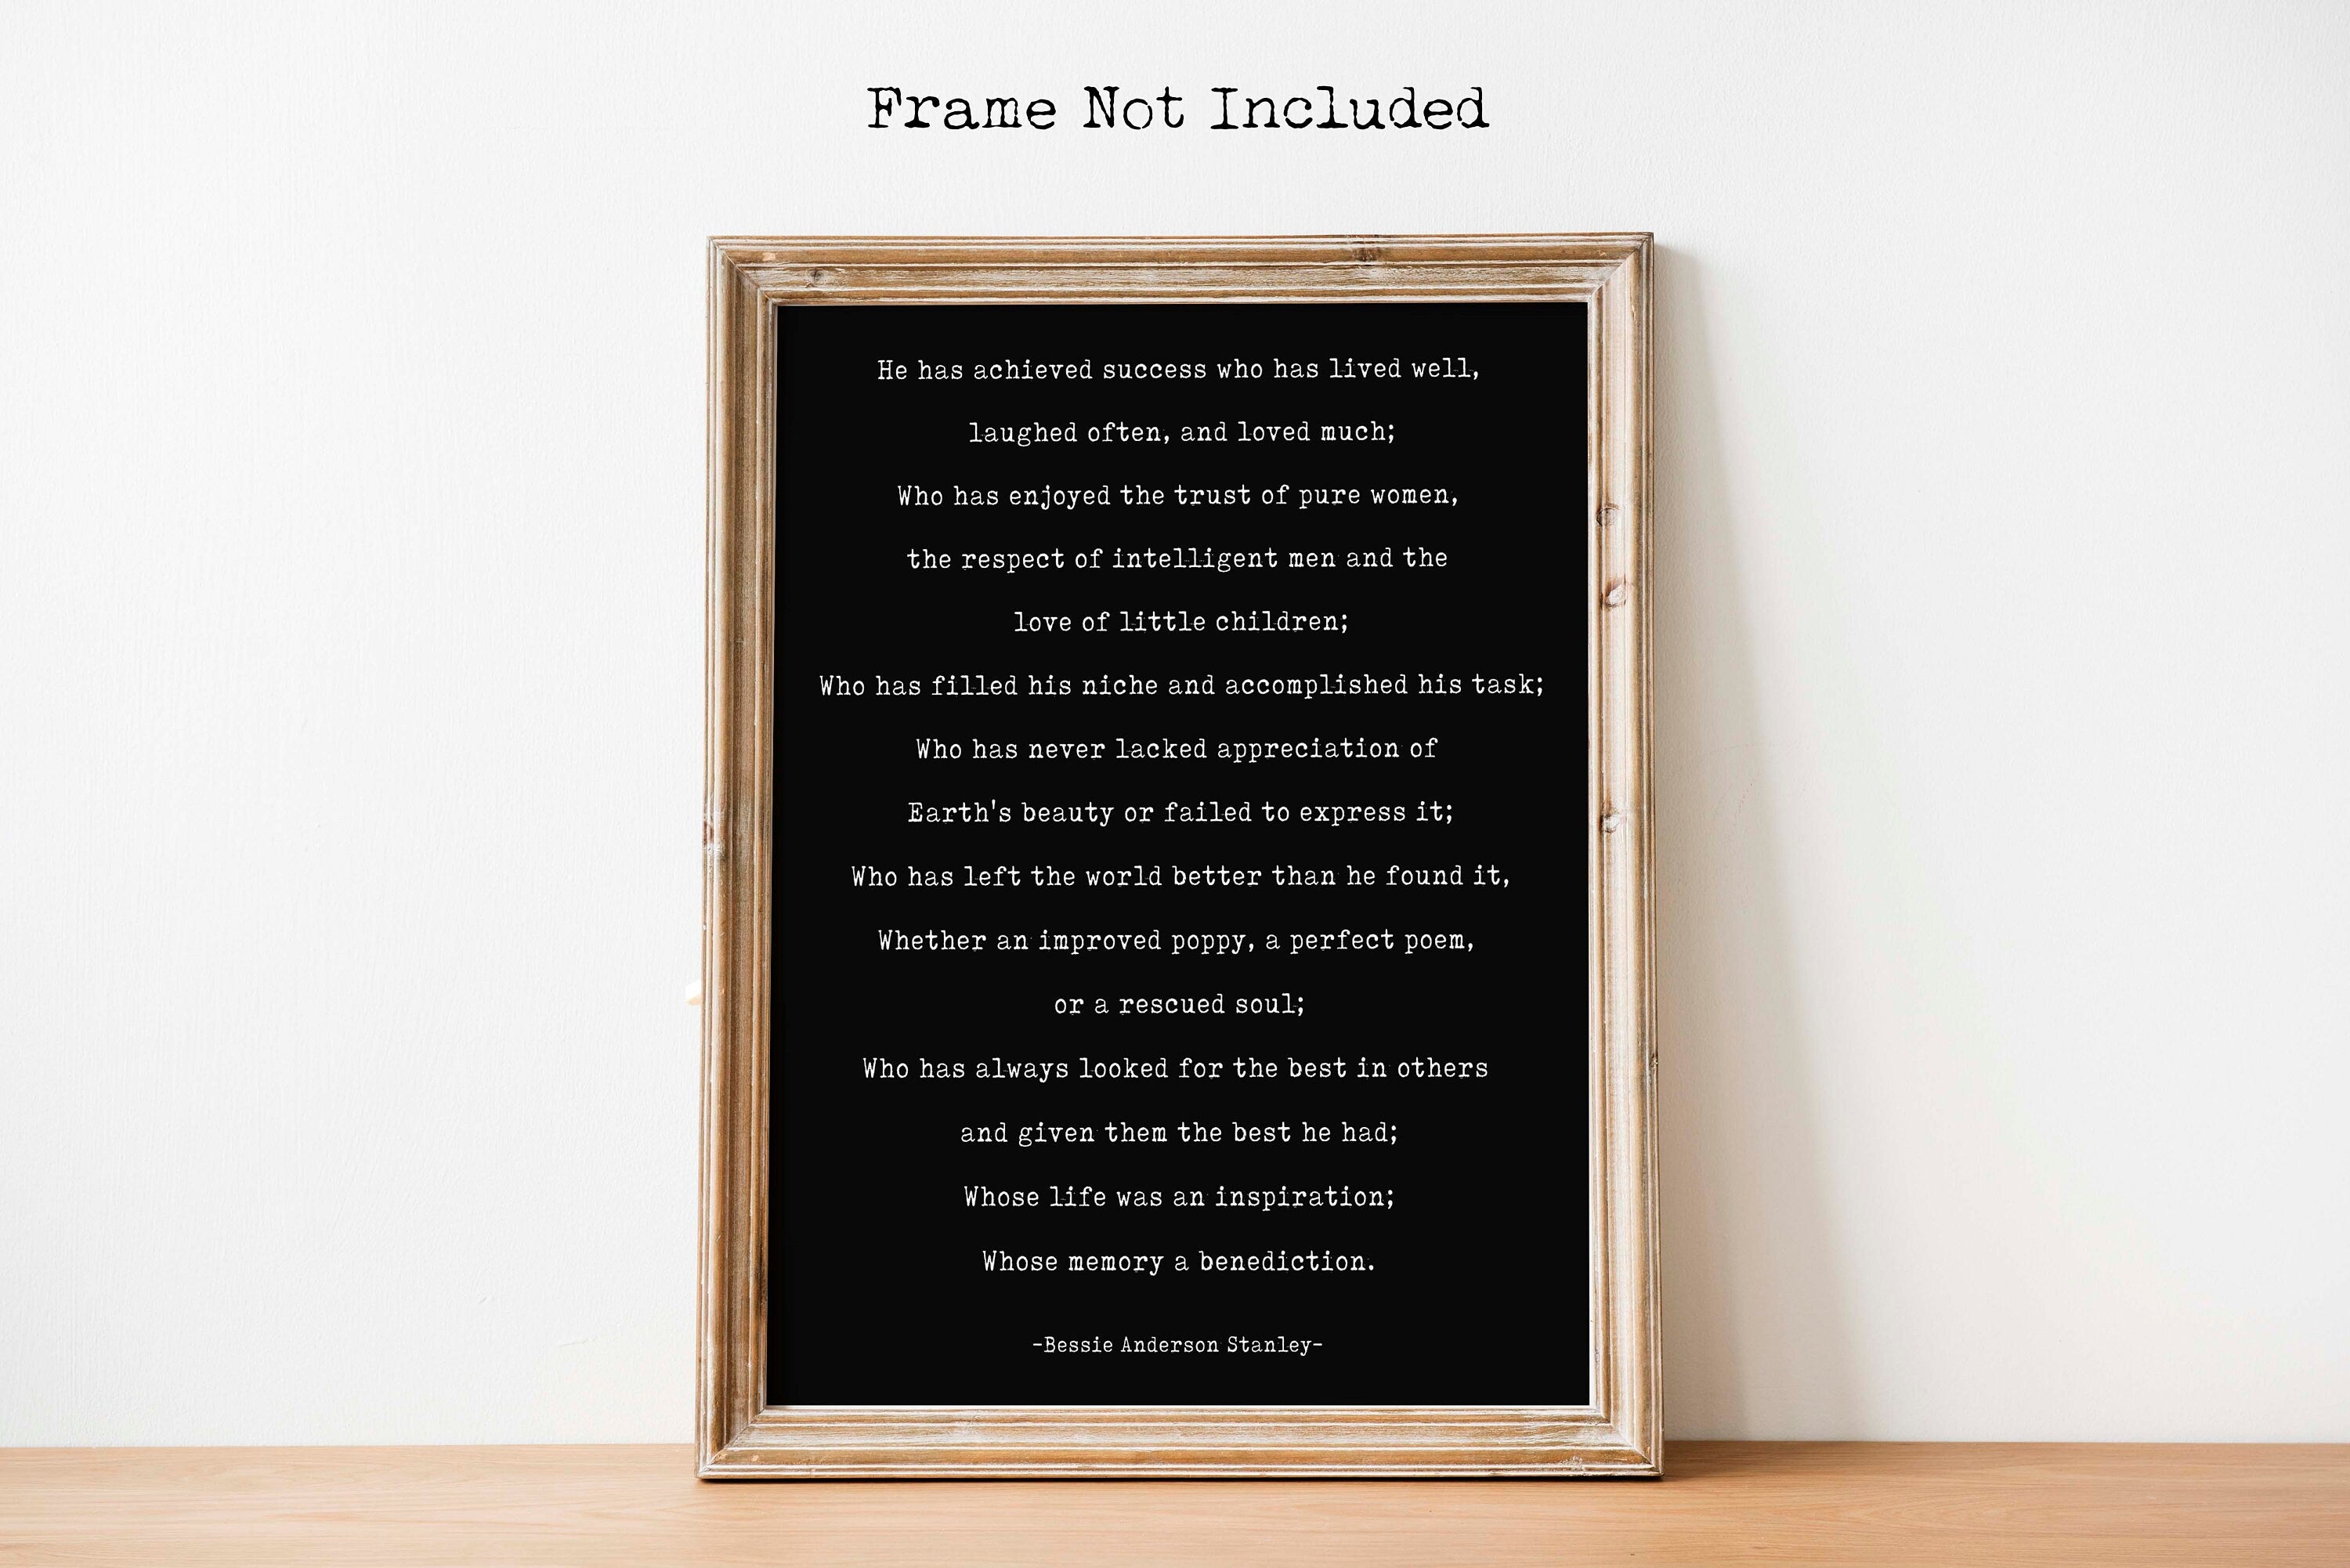 Bessie Anderson Stanley Success Poem Print, Lived Well Laughed Often Inspirational Quote Wall Art Prints